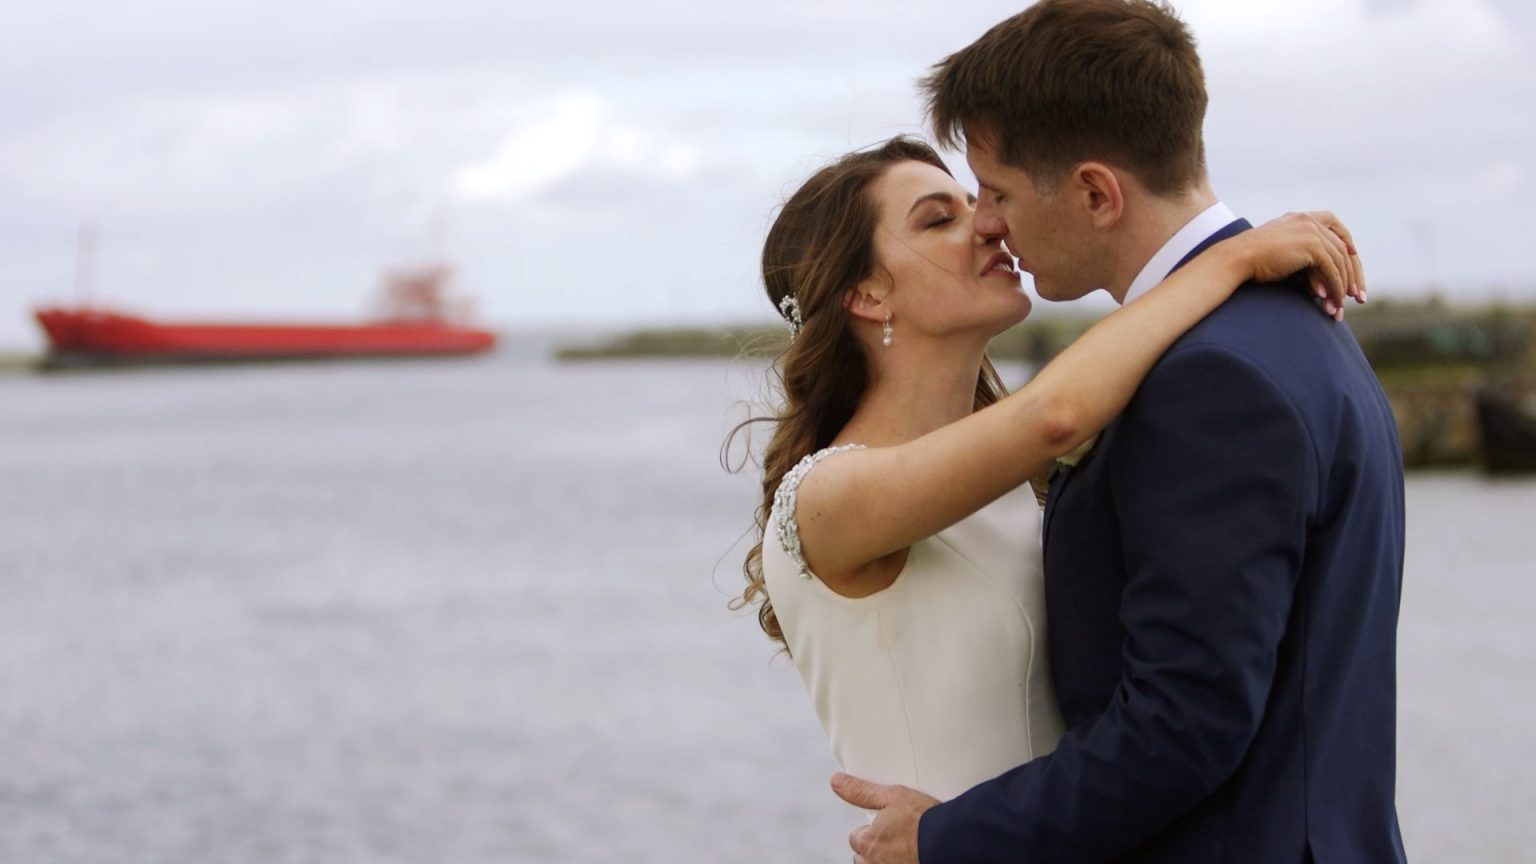 www.youandme.ie wedding videography